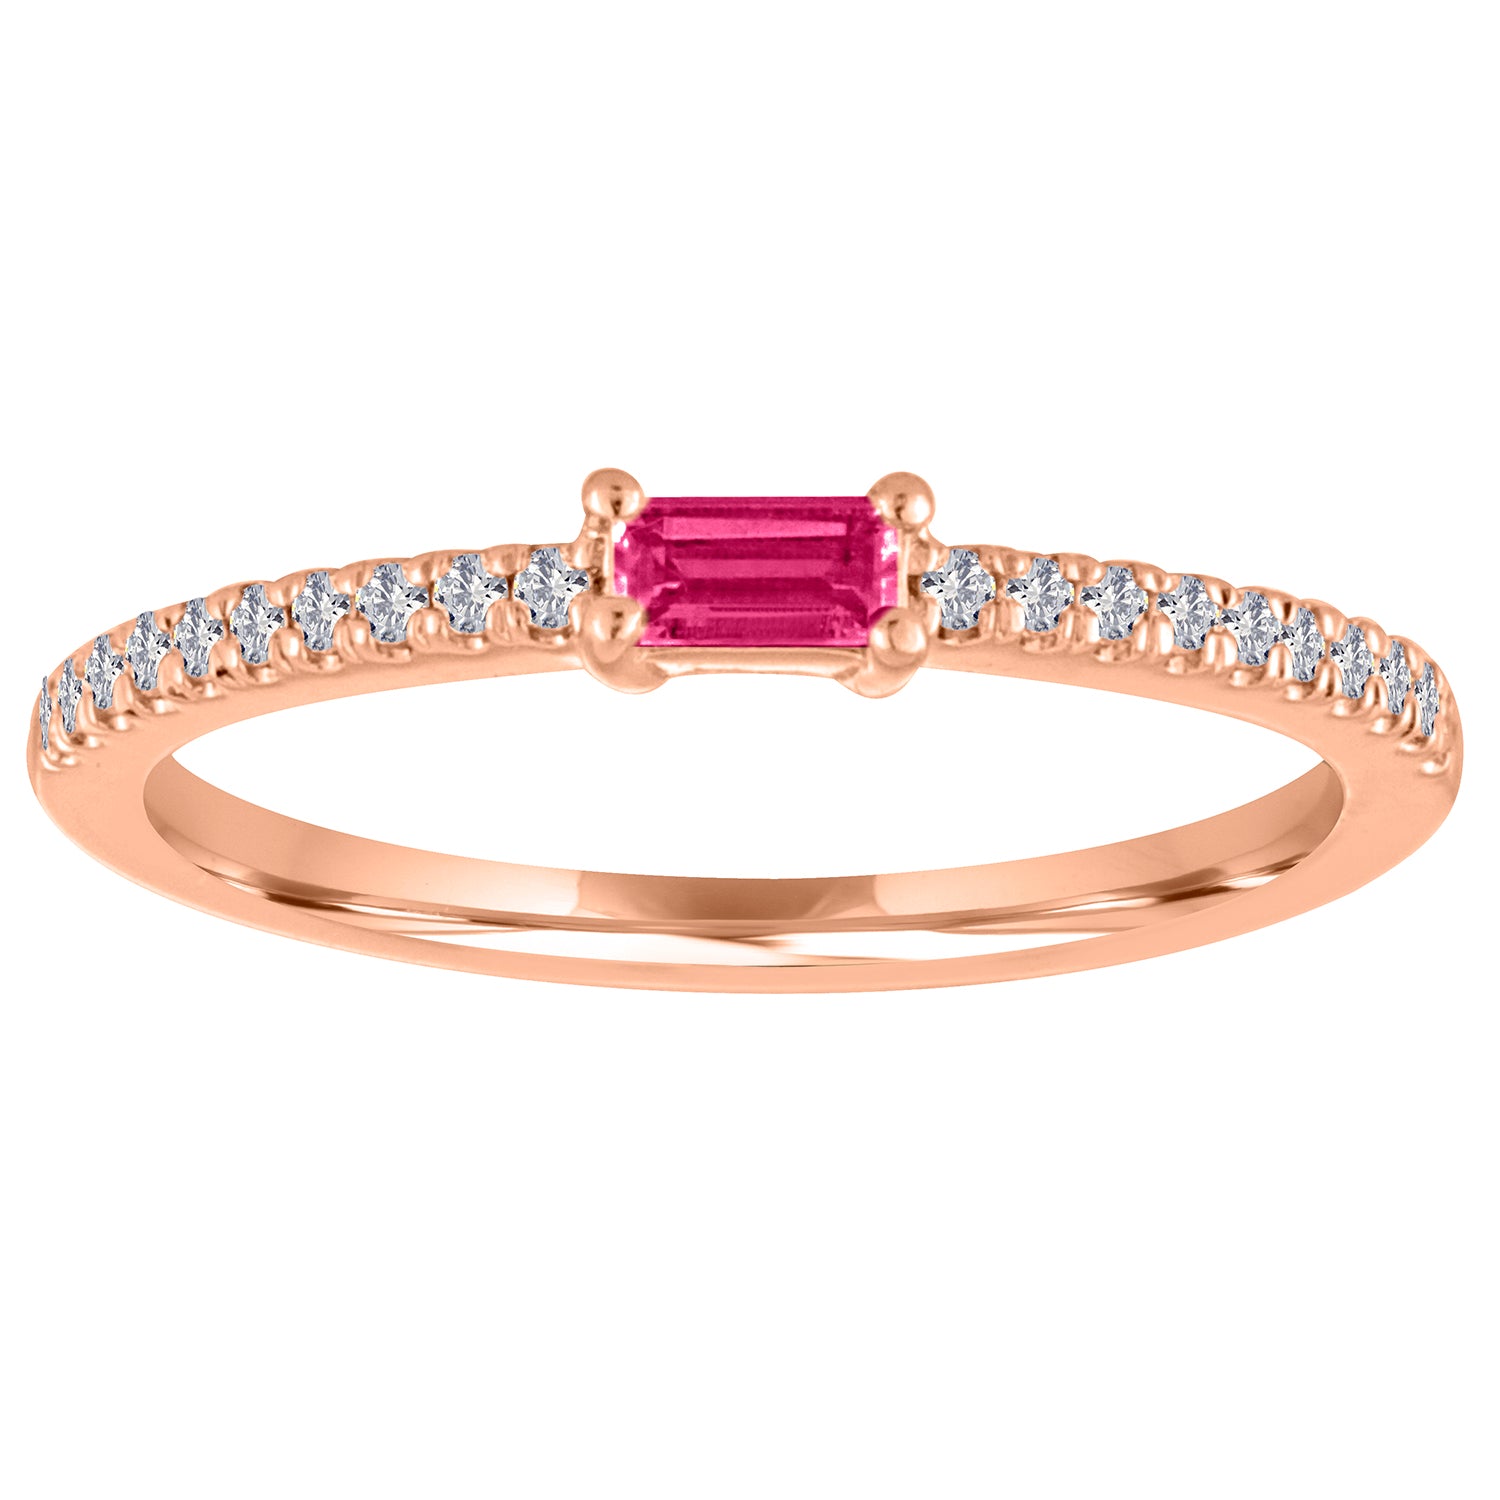 Rose gold skinny band with a ruby baguette in the center and round diamonds on the shank.